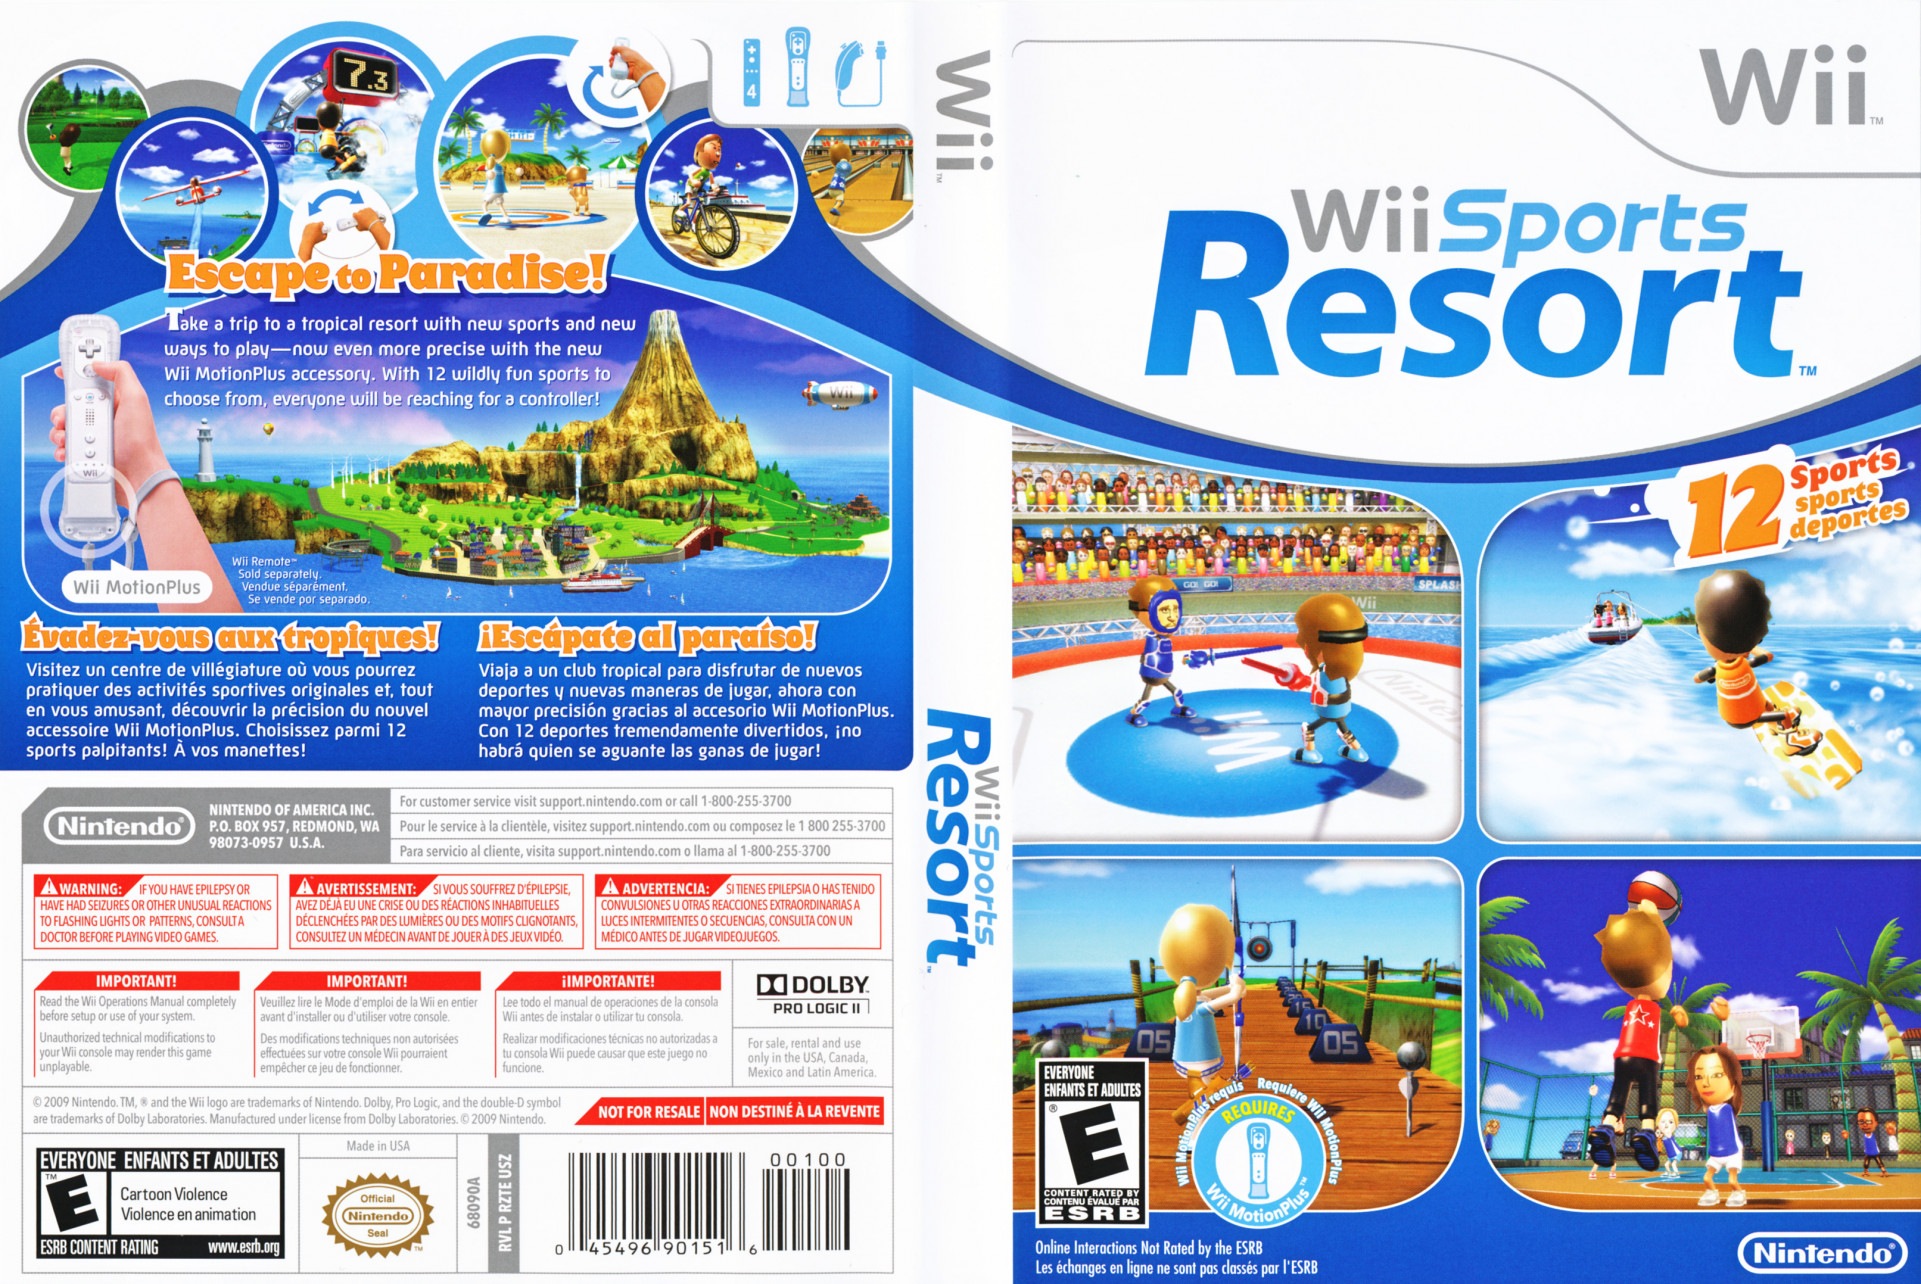 Font for "Escape to Paradise!" and "12 Sports" in this wii...